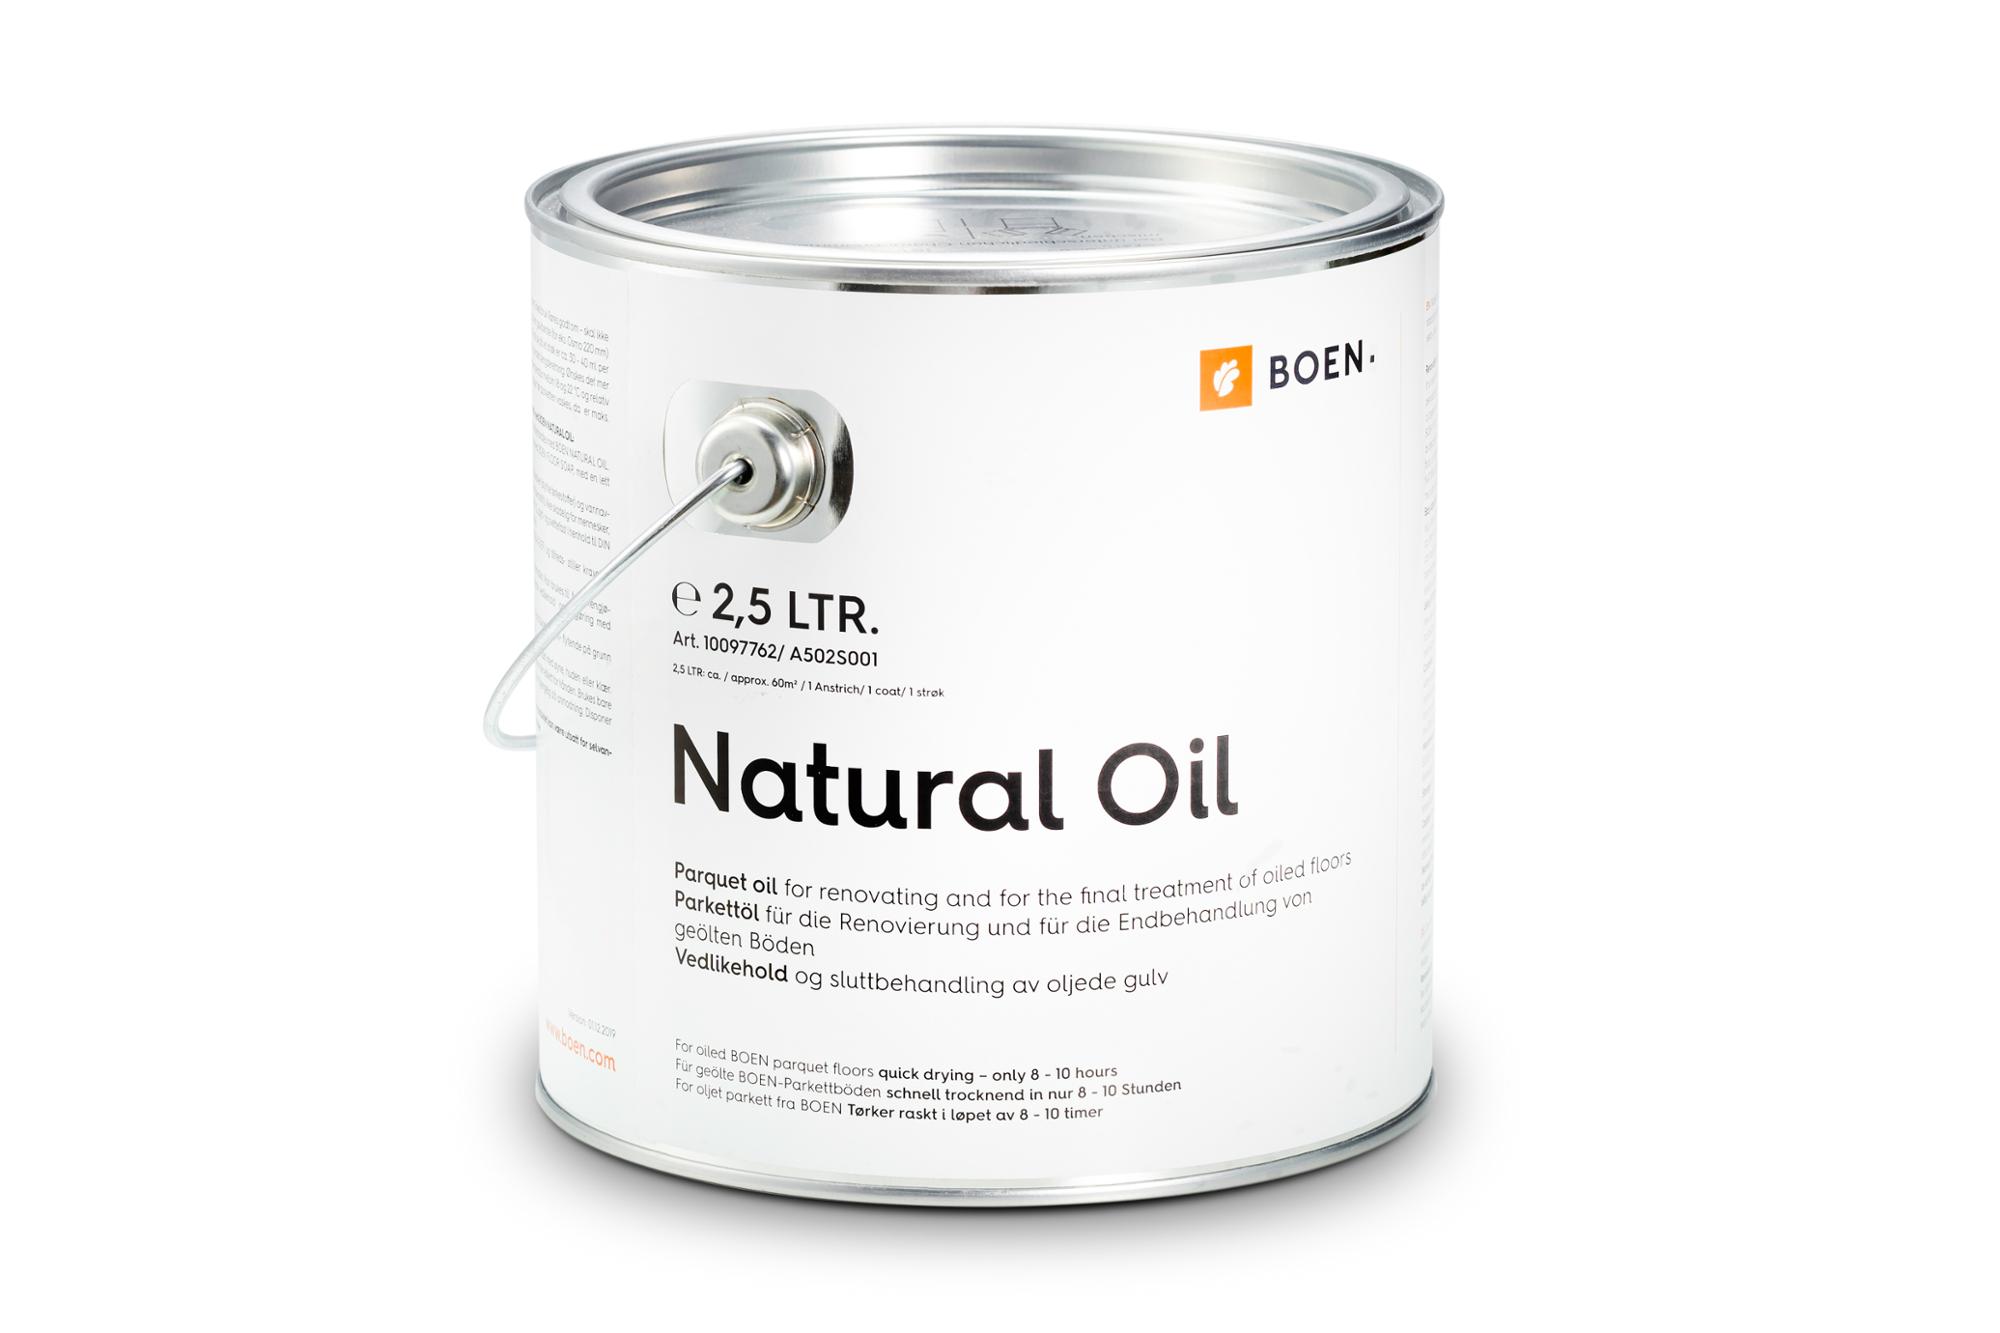 Olio Neutro BOEN 2,5L

For finishing of sanded
or untreated wooden surfaces.
1 litre for approx. 24m²